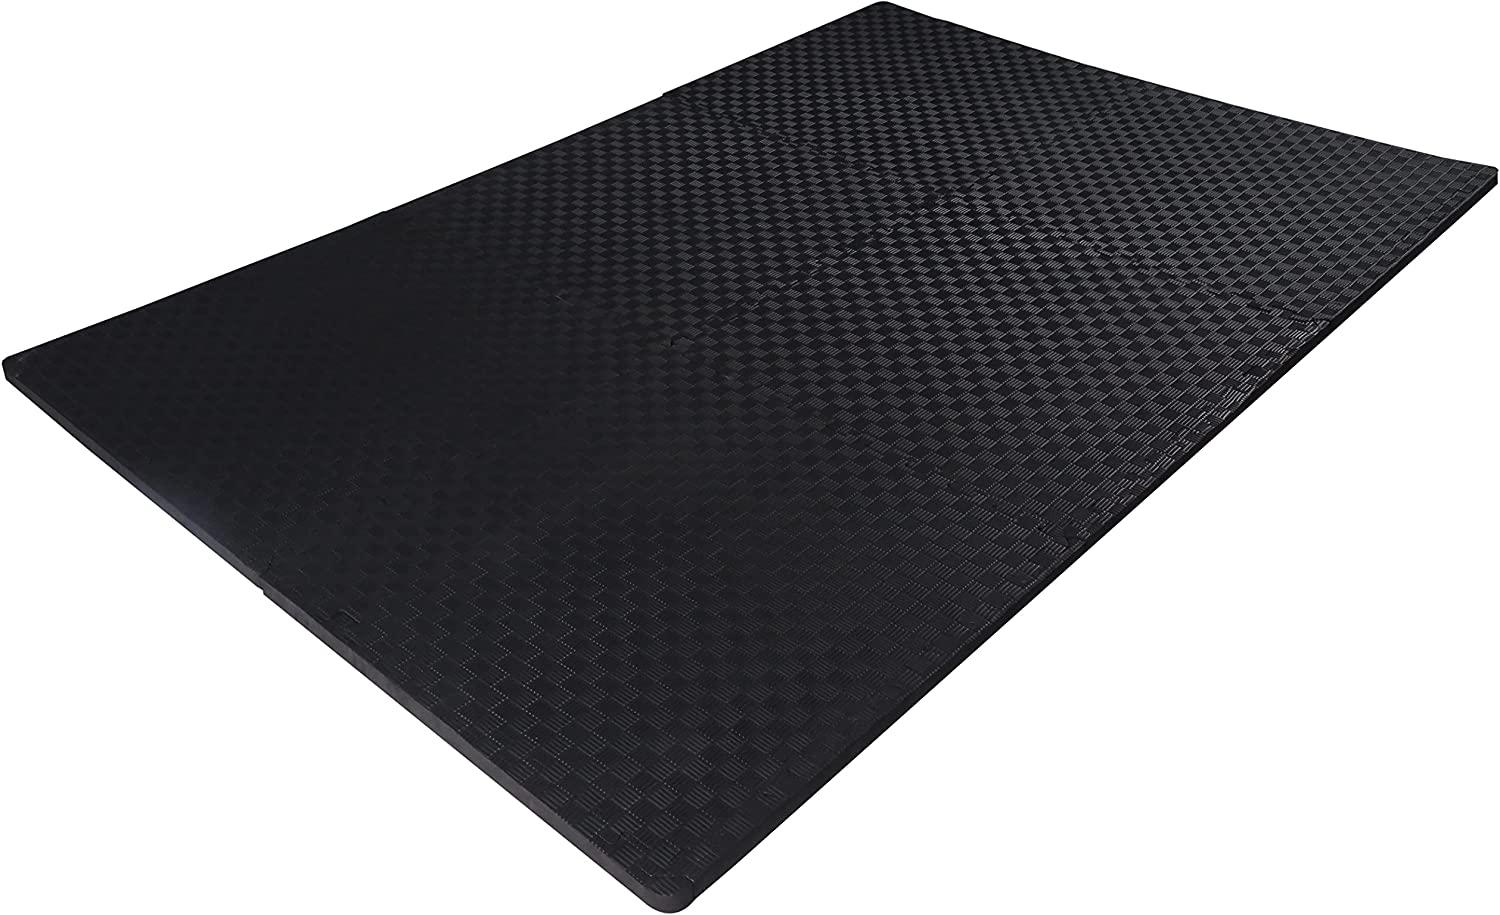 BalanceFrom 1/2 In. Thick Flooring Puzzle Exercise Mat with High